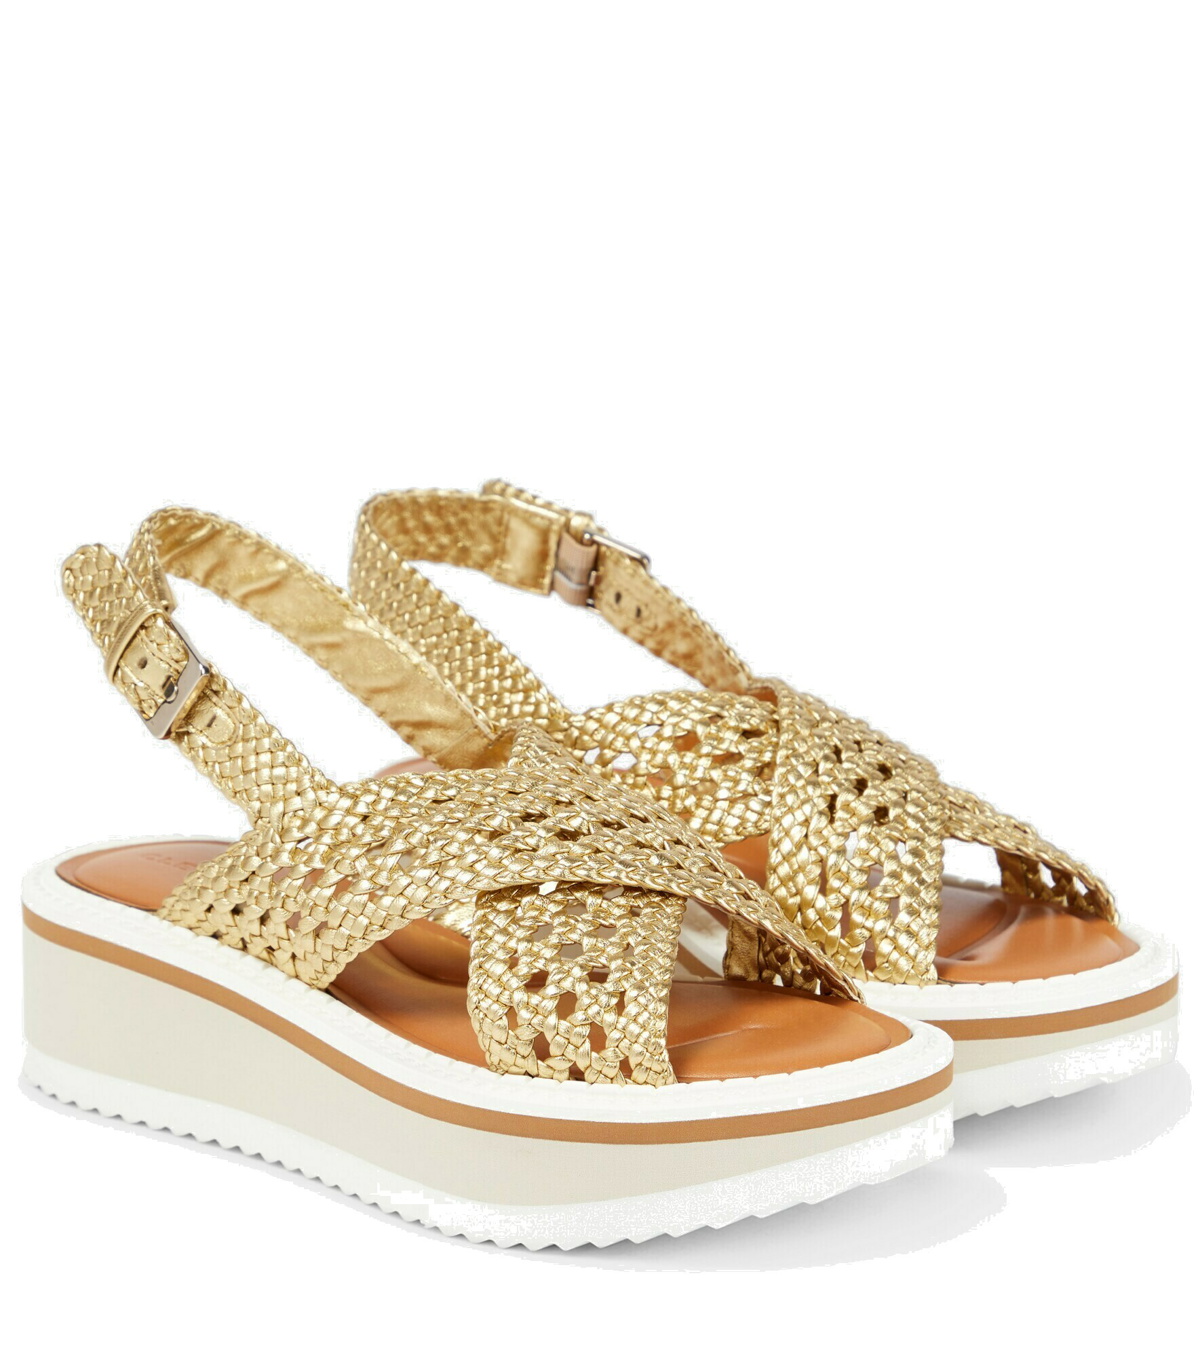 Clergerie - Freedom leather slingback sandals Clergerie